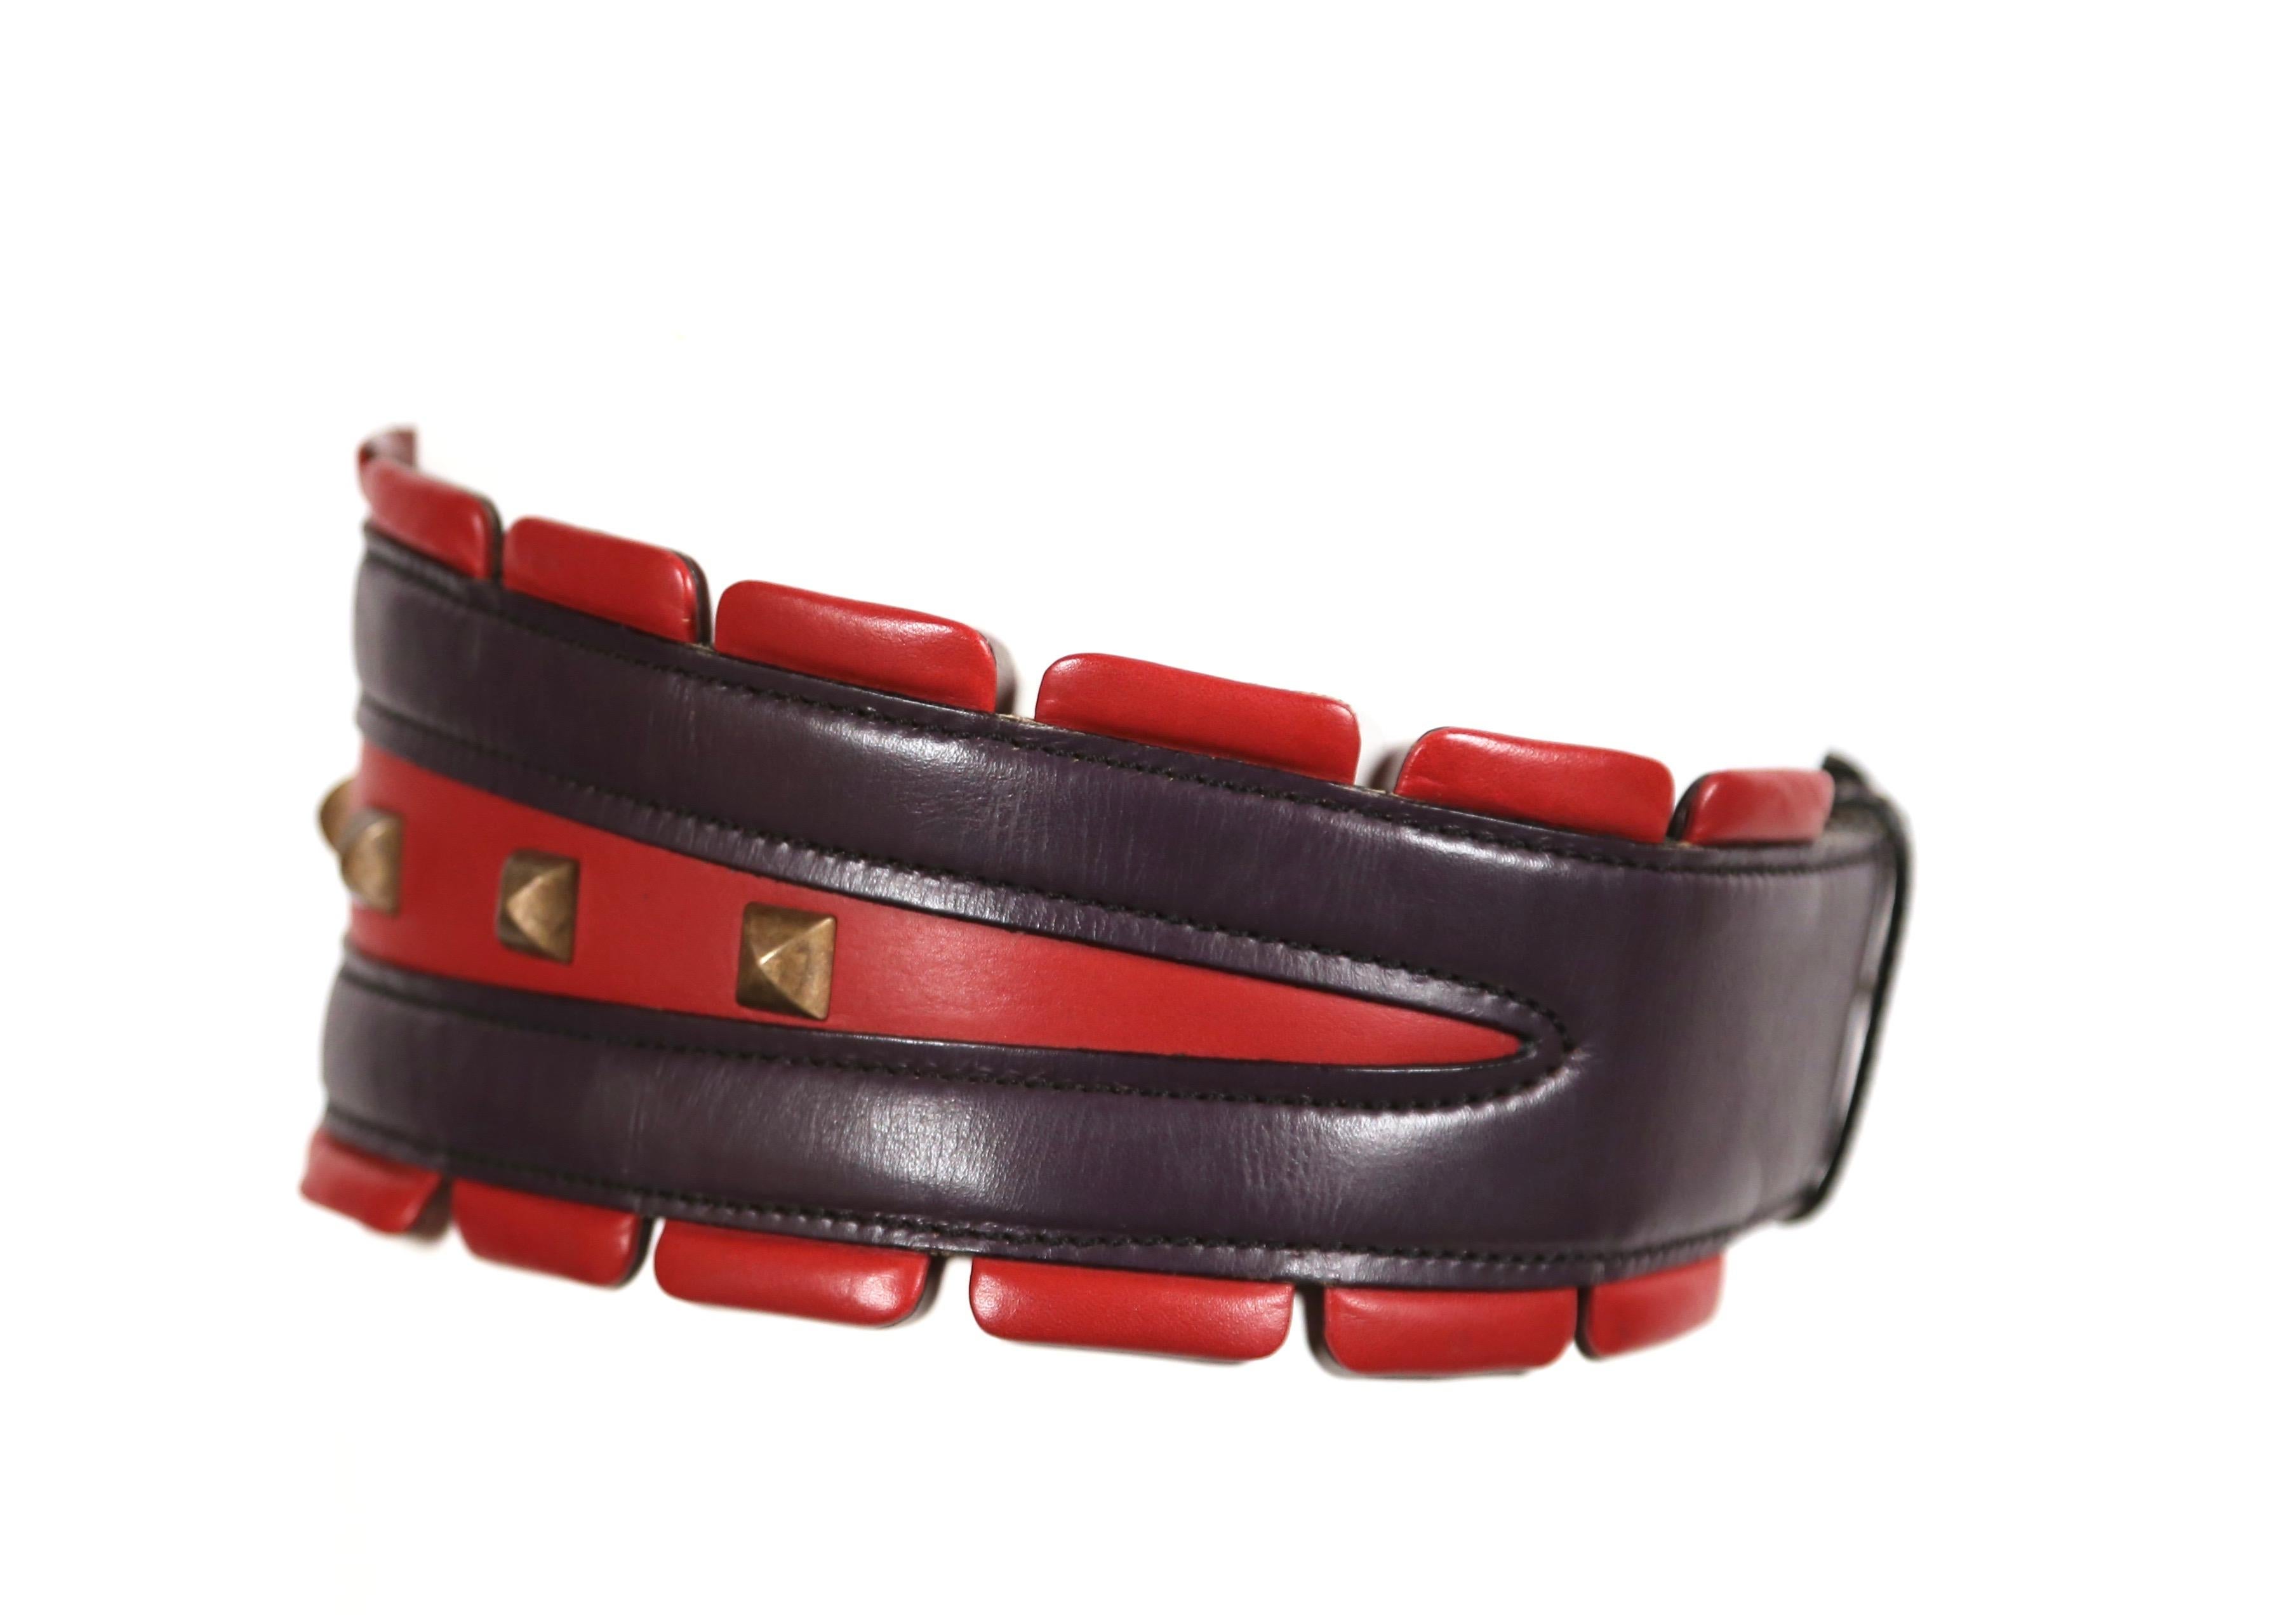 Very rare, red and purple leather belt with brass toned pyramid studs designed by Azzedine Alaia as seen on the fall 1988 runway. Belt is labeled a French 65 and ideally fits a 23-25